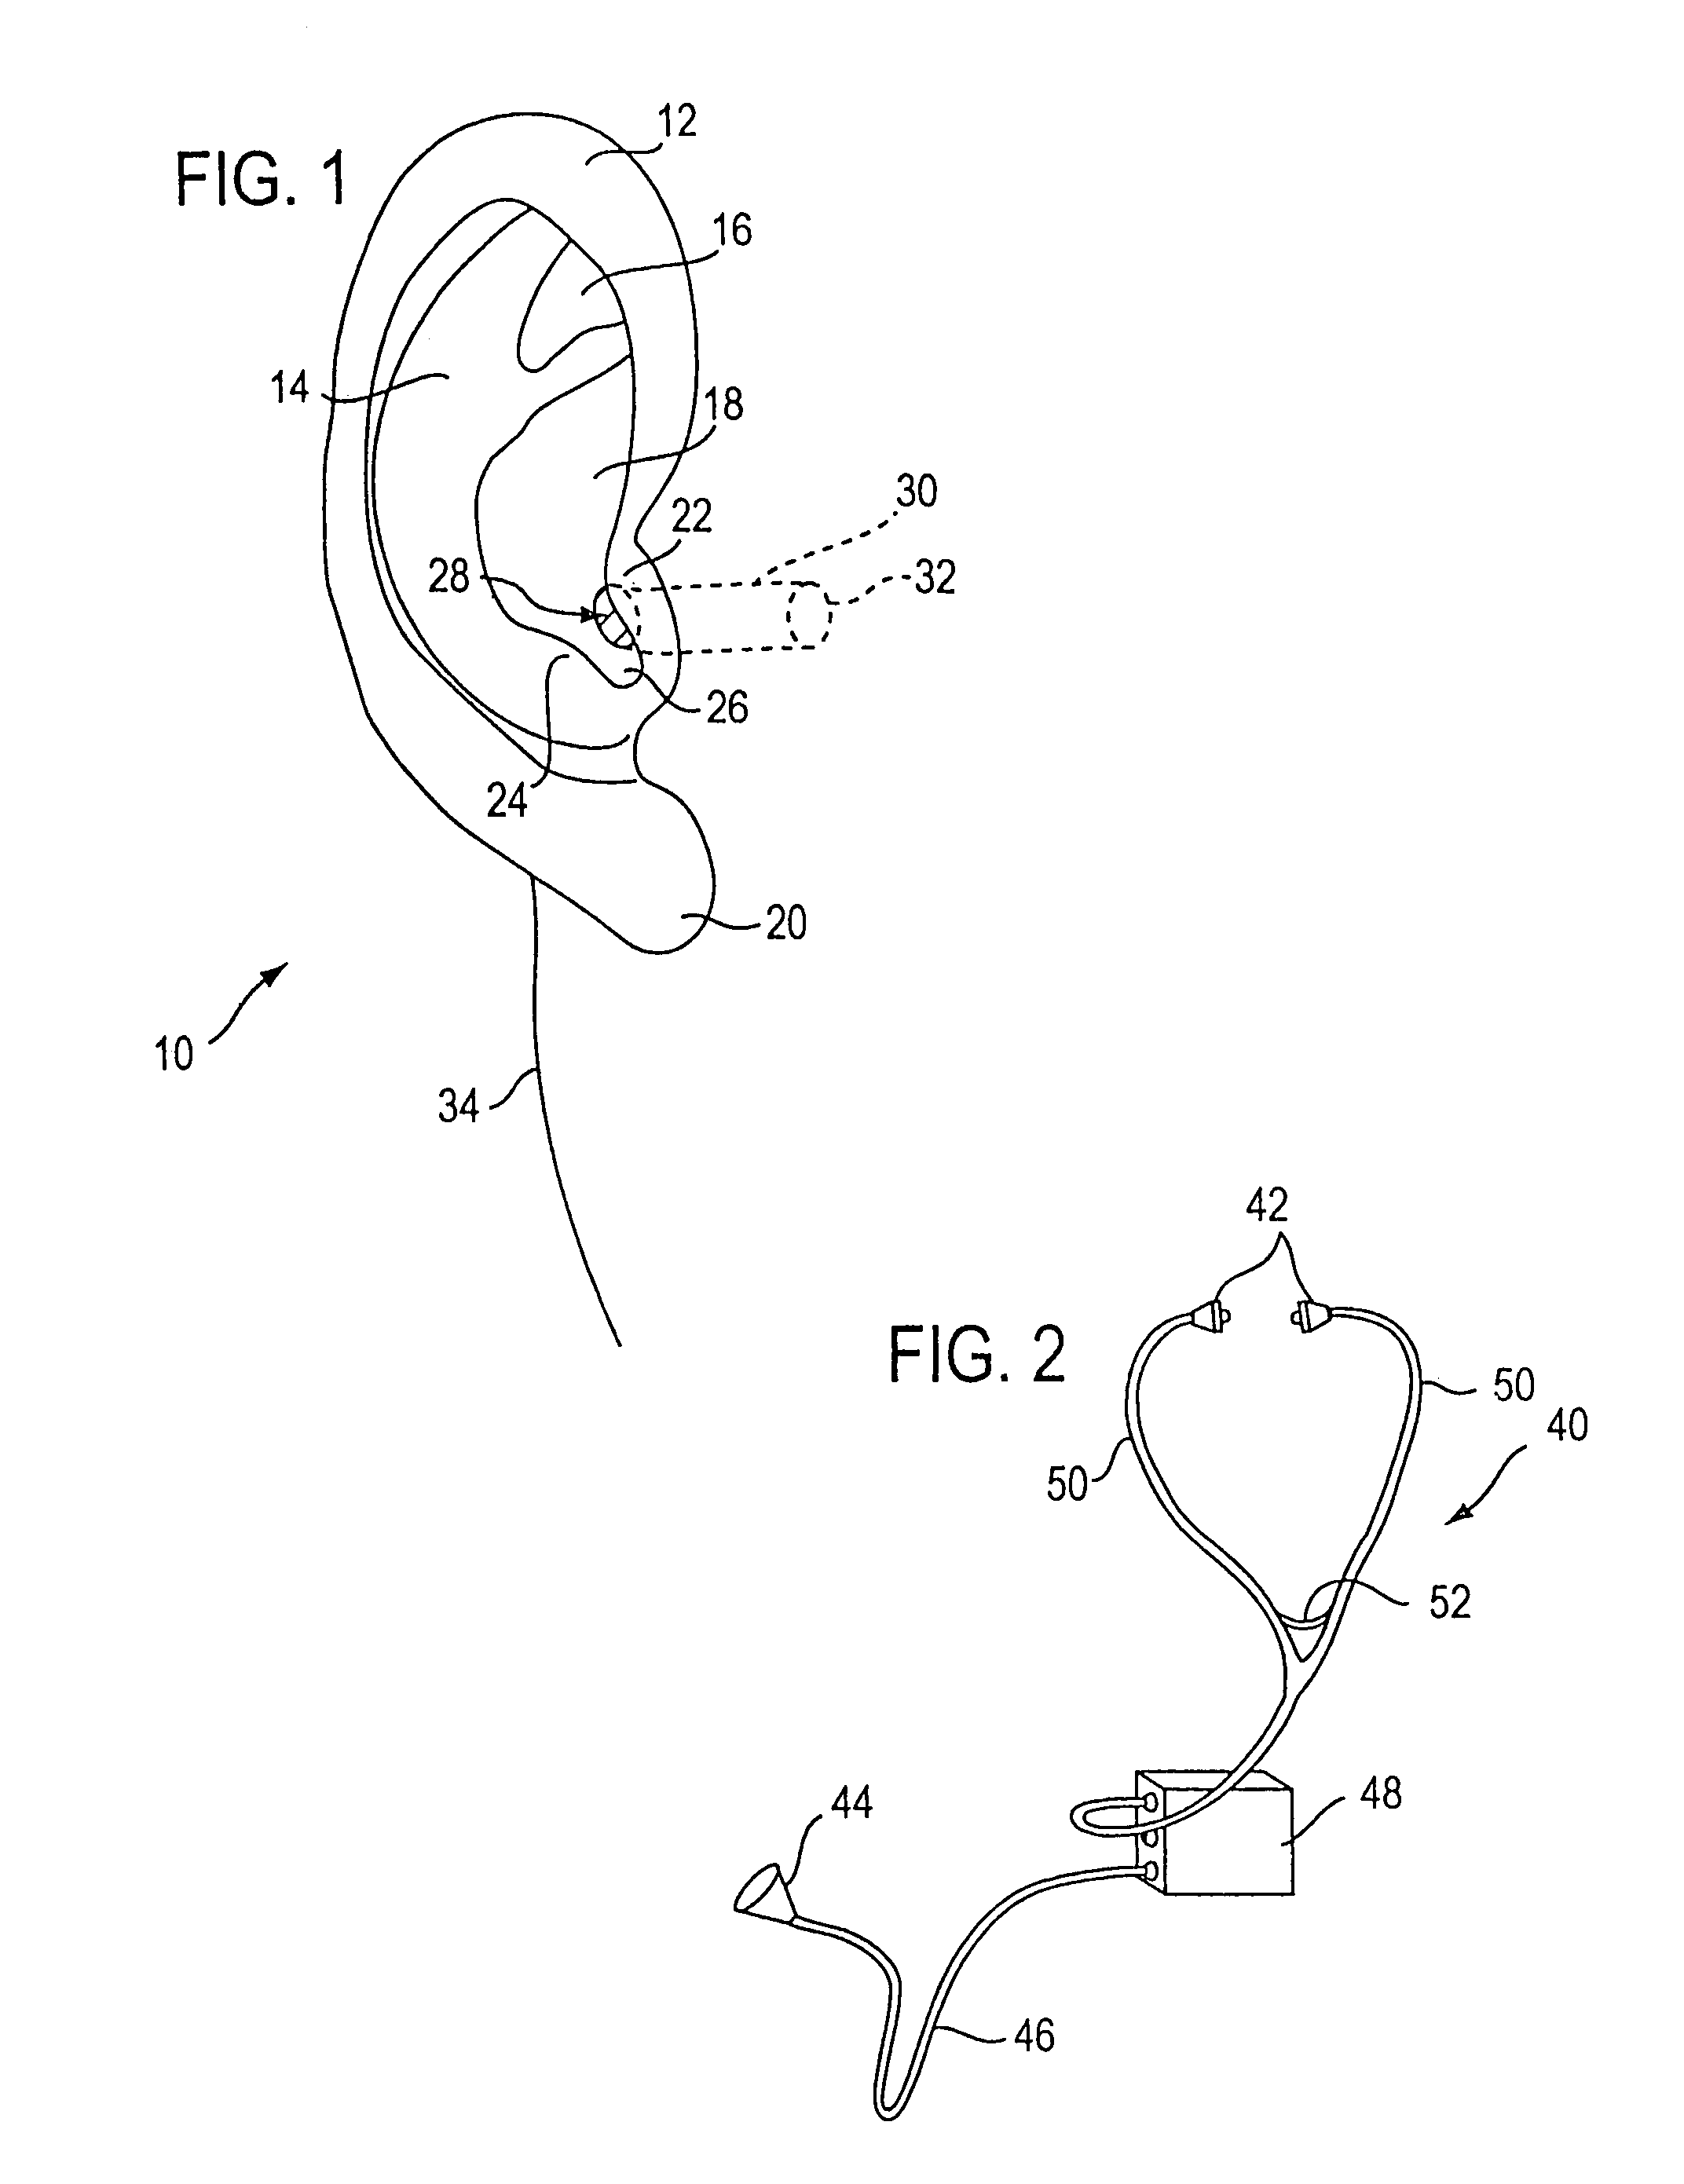 Noise barrier apparatus having acoustic wave damping cushions